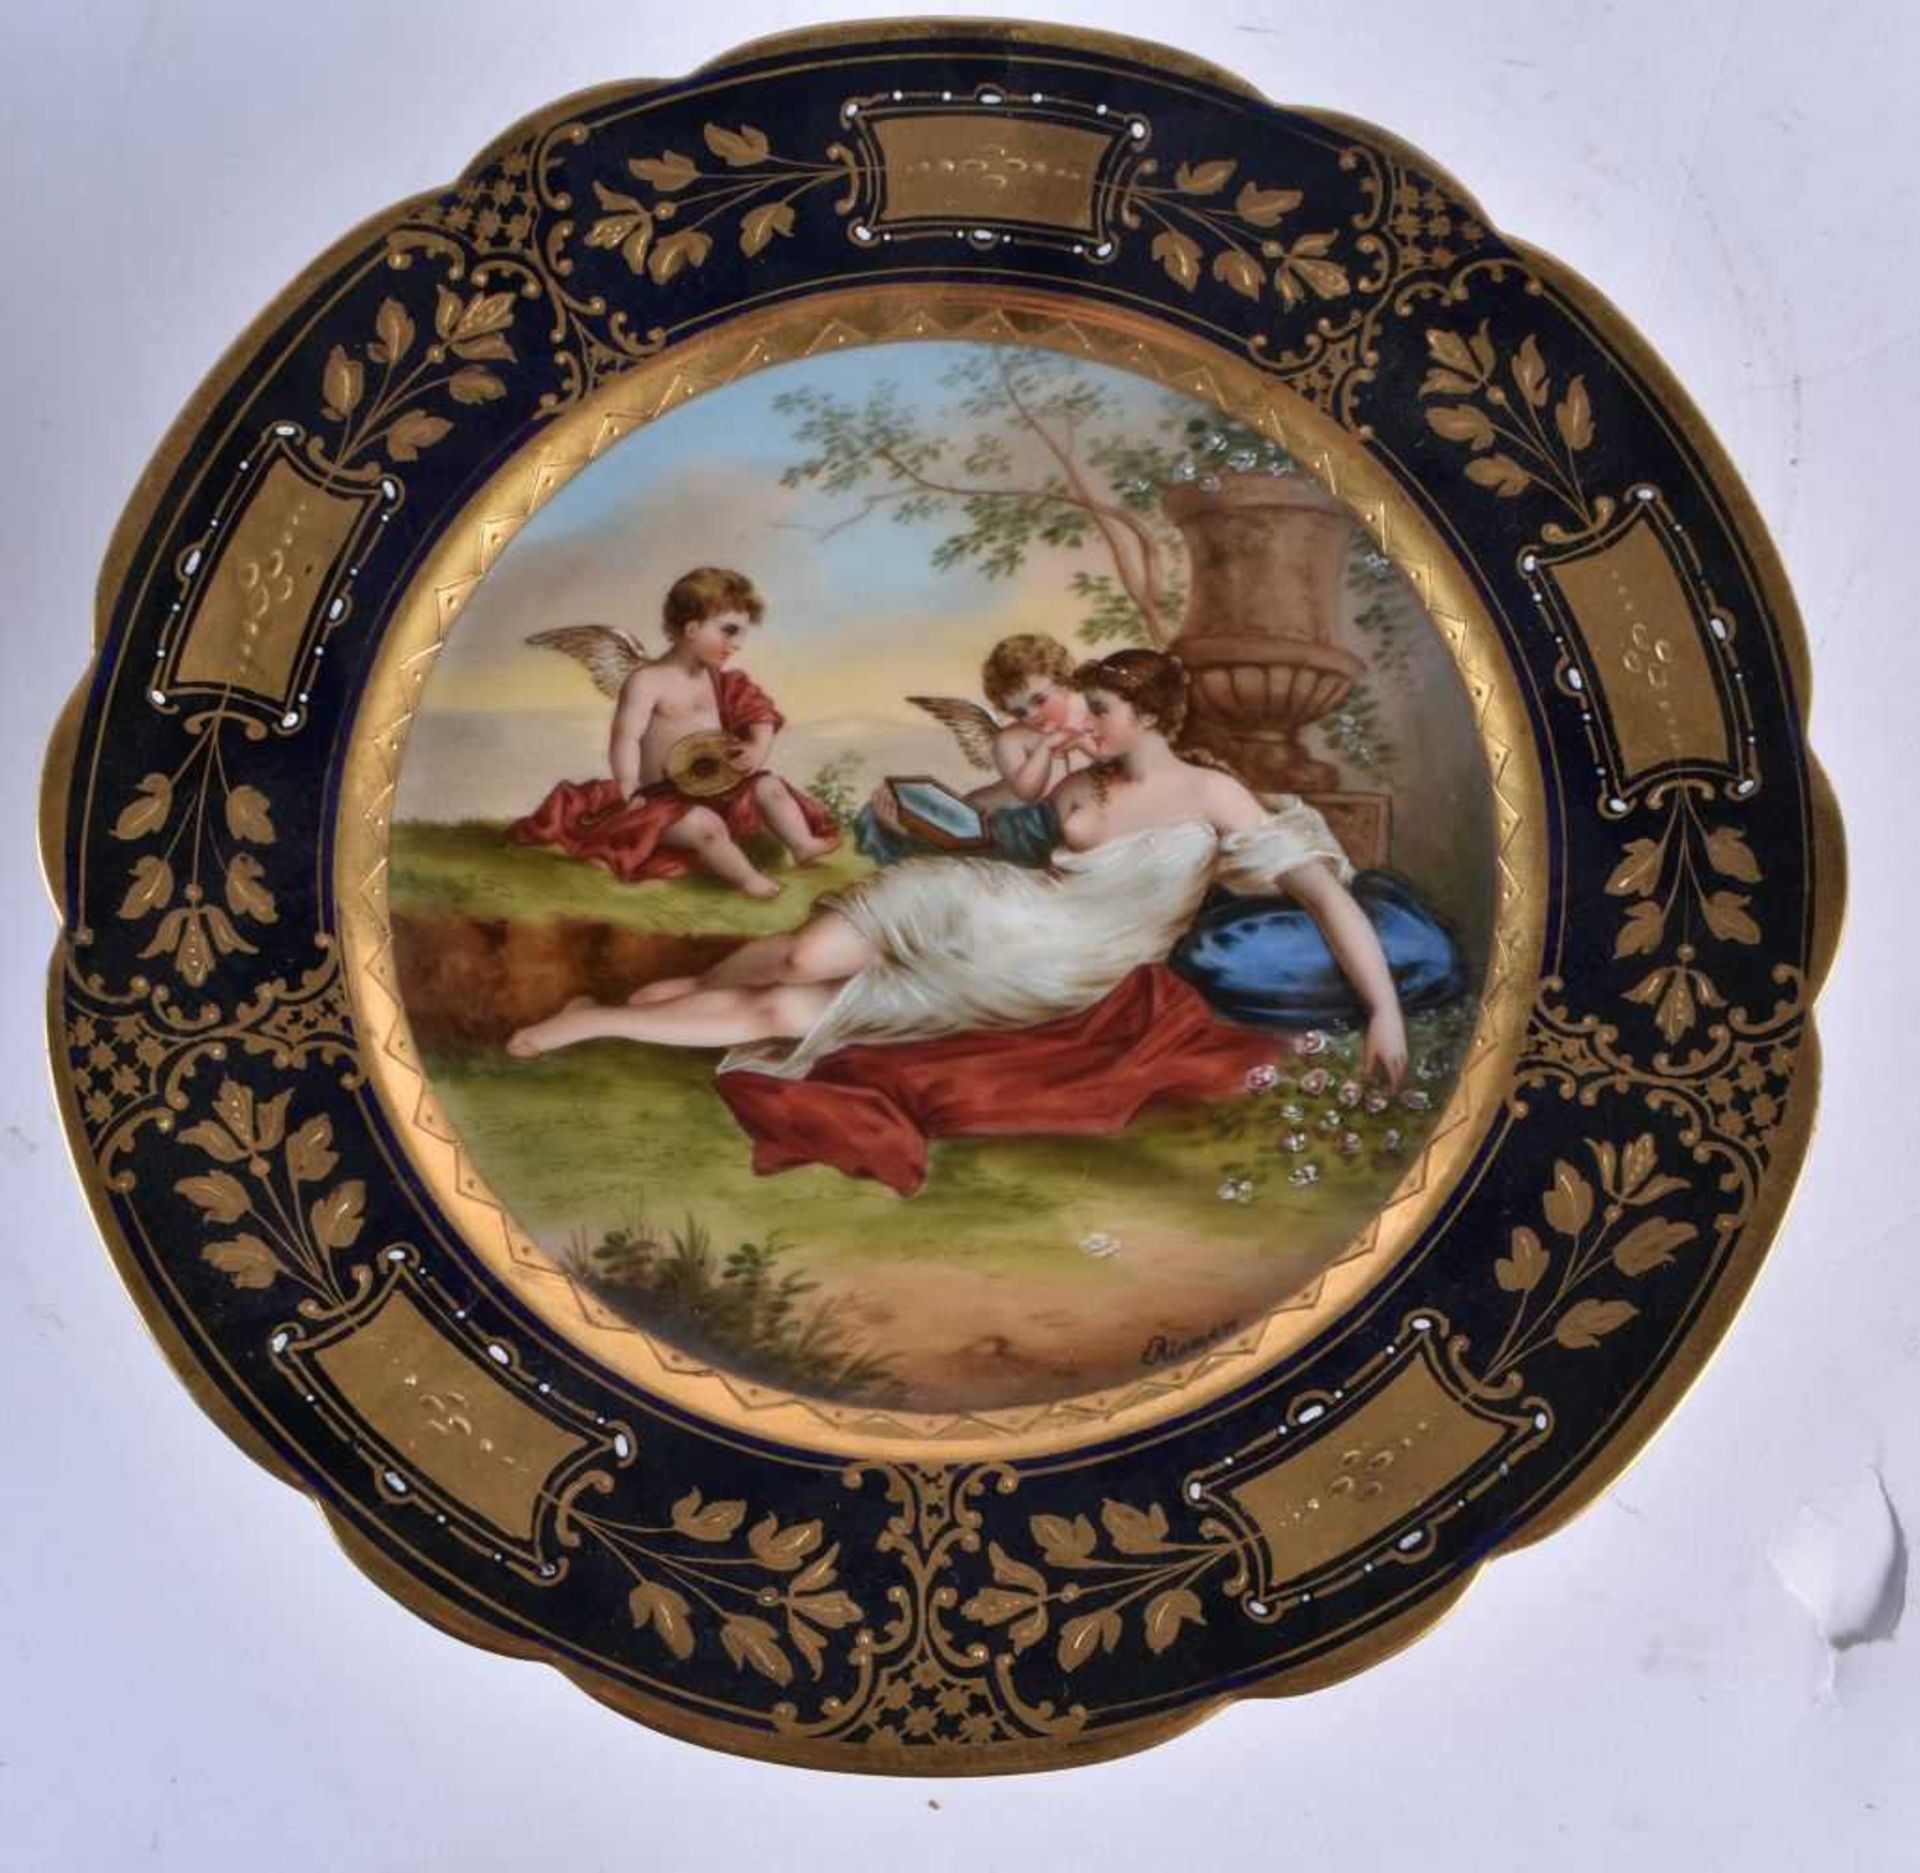 A GOOD EARLY 20TH CENTURY VIENNA PORCELAIN DESSERT SERVICE C1900 painted with figures and landscapes - Image 5 of 9